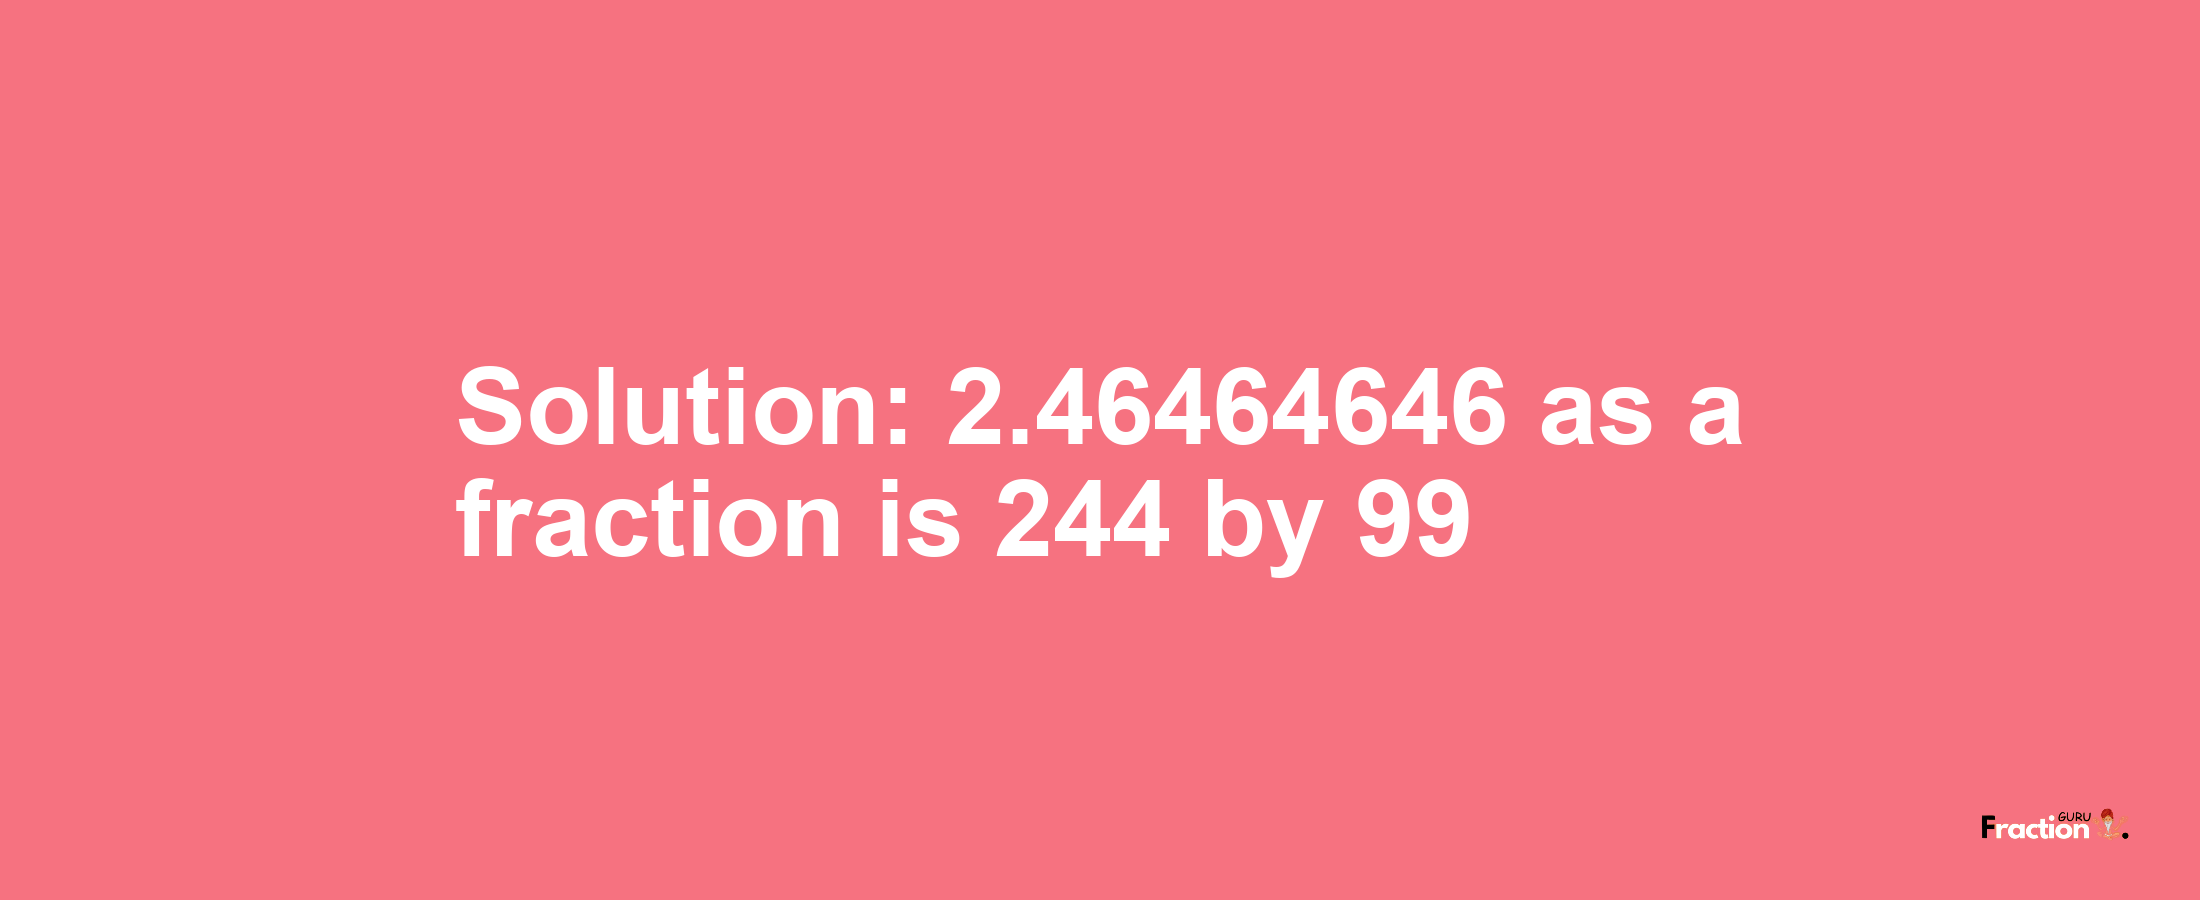 Solution:2.46464646 as a fraction is 244/99